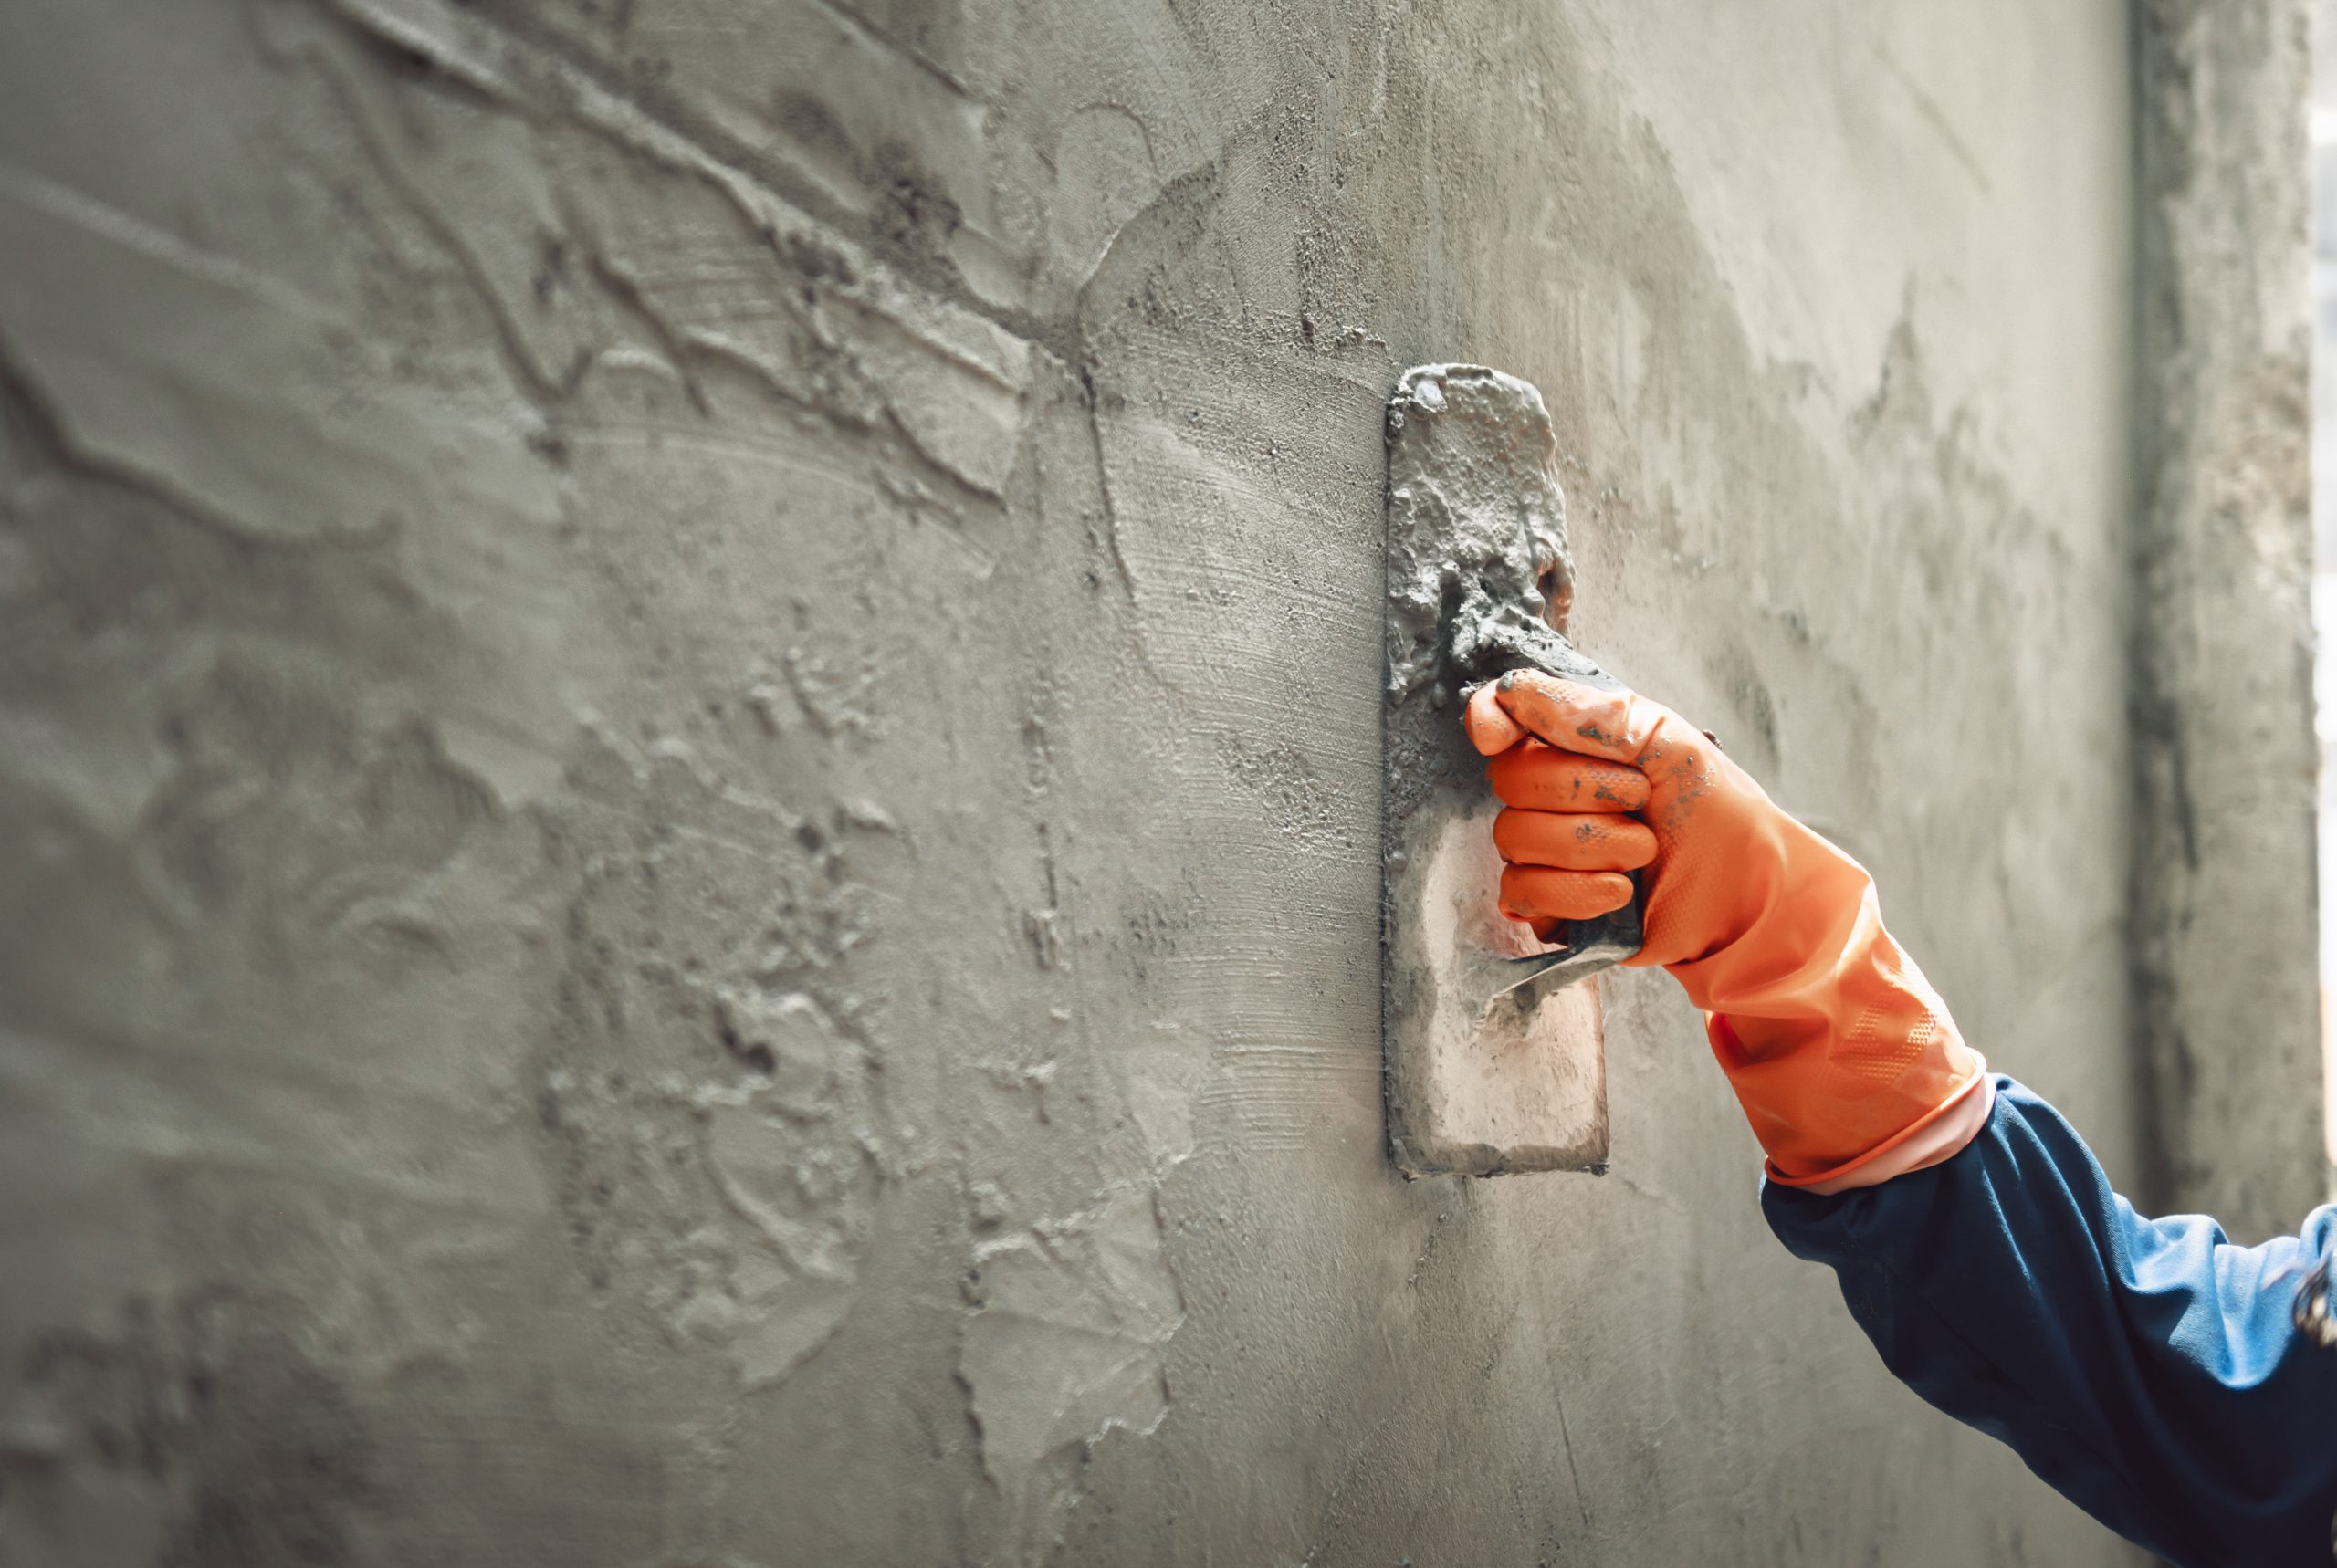 An image of a worker's hand plastering cement at a wall for building a house.